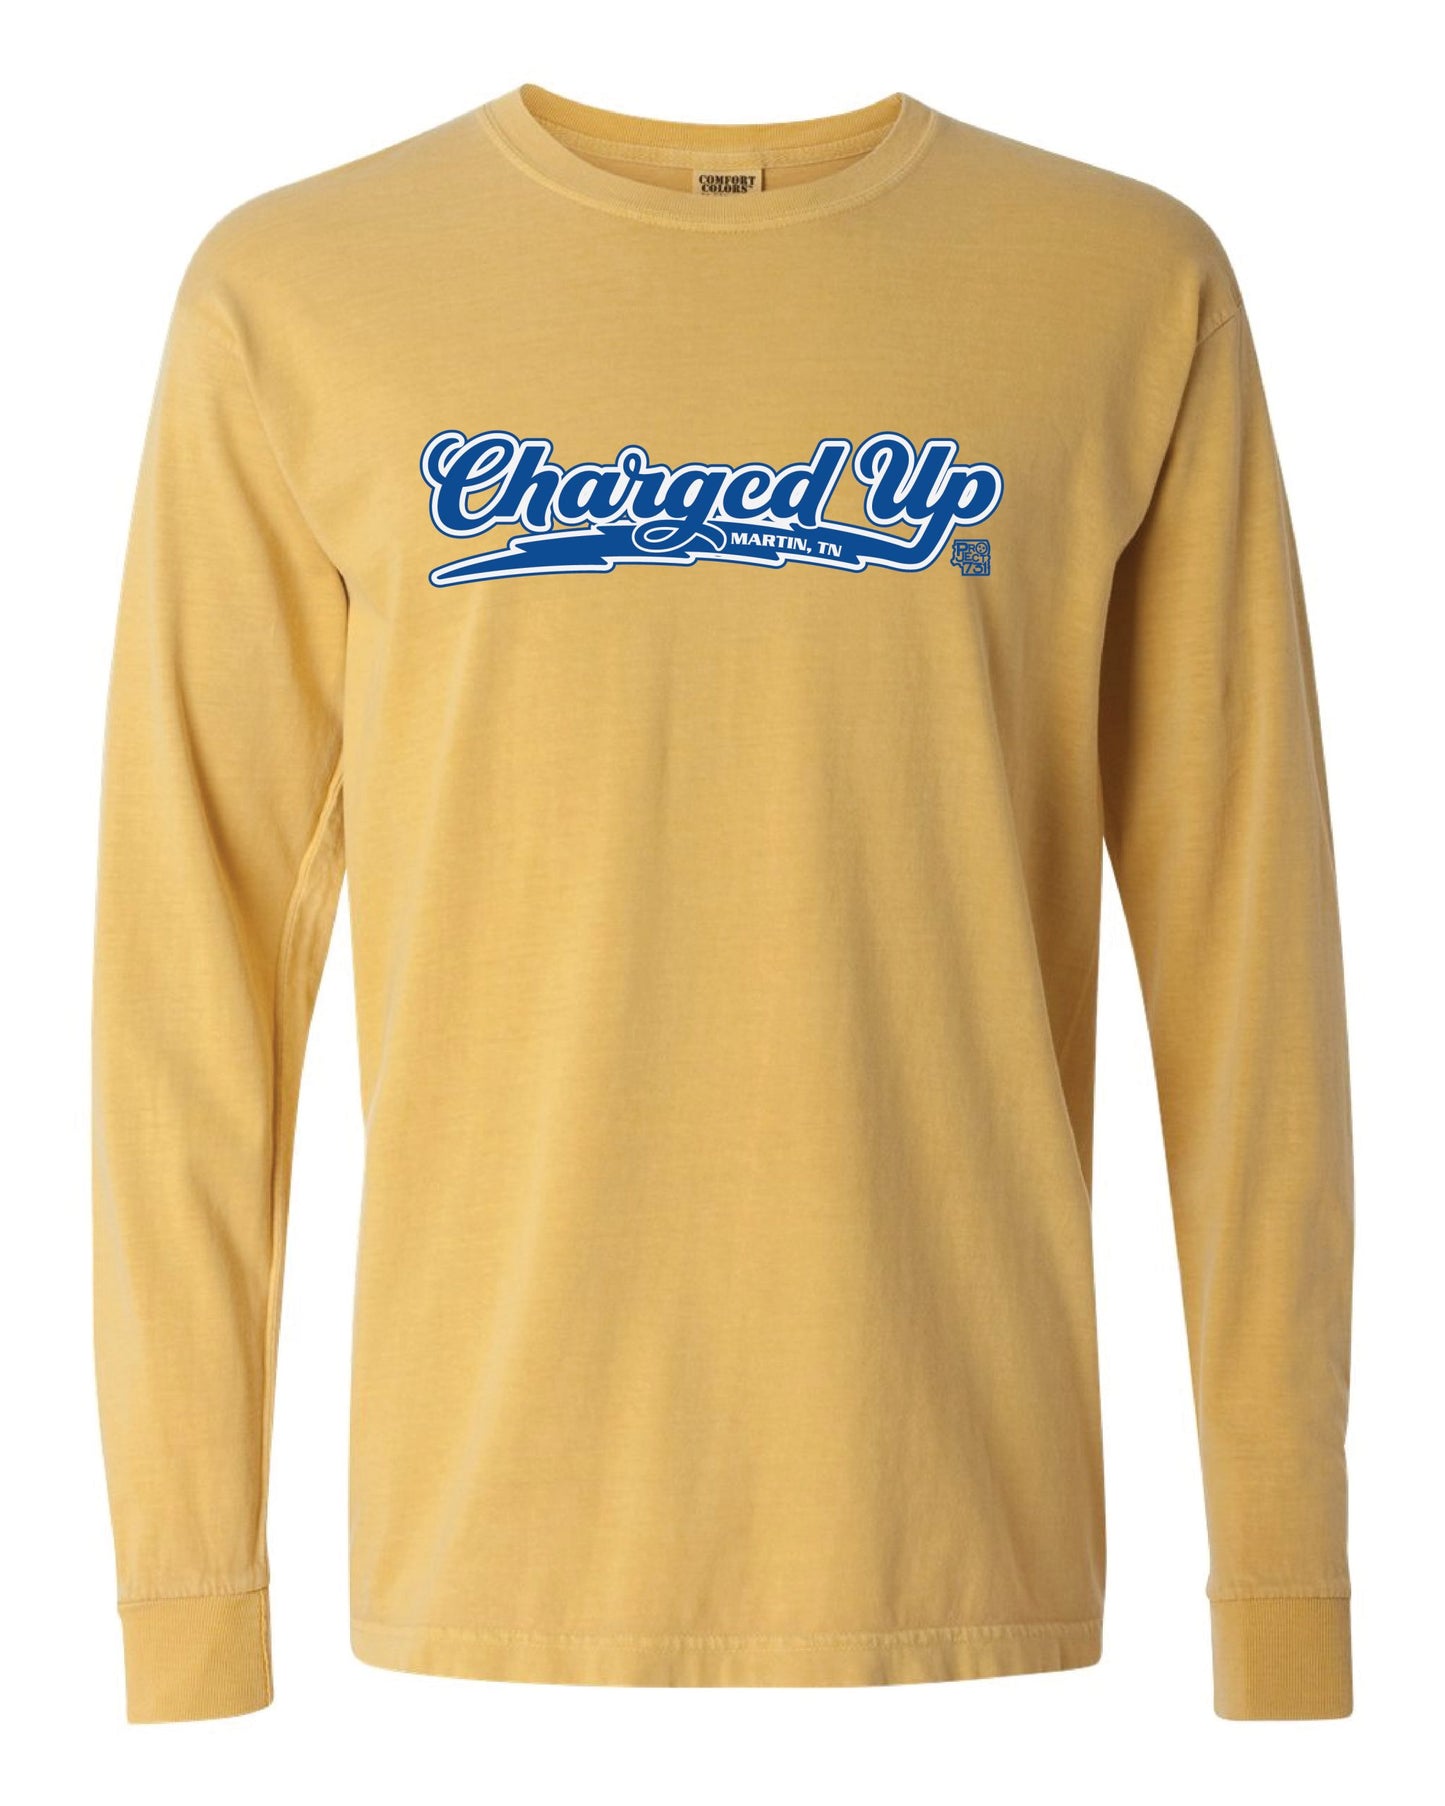 Charged Up Vintage Long Sleeve